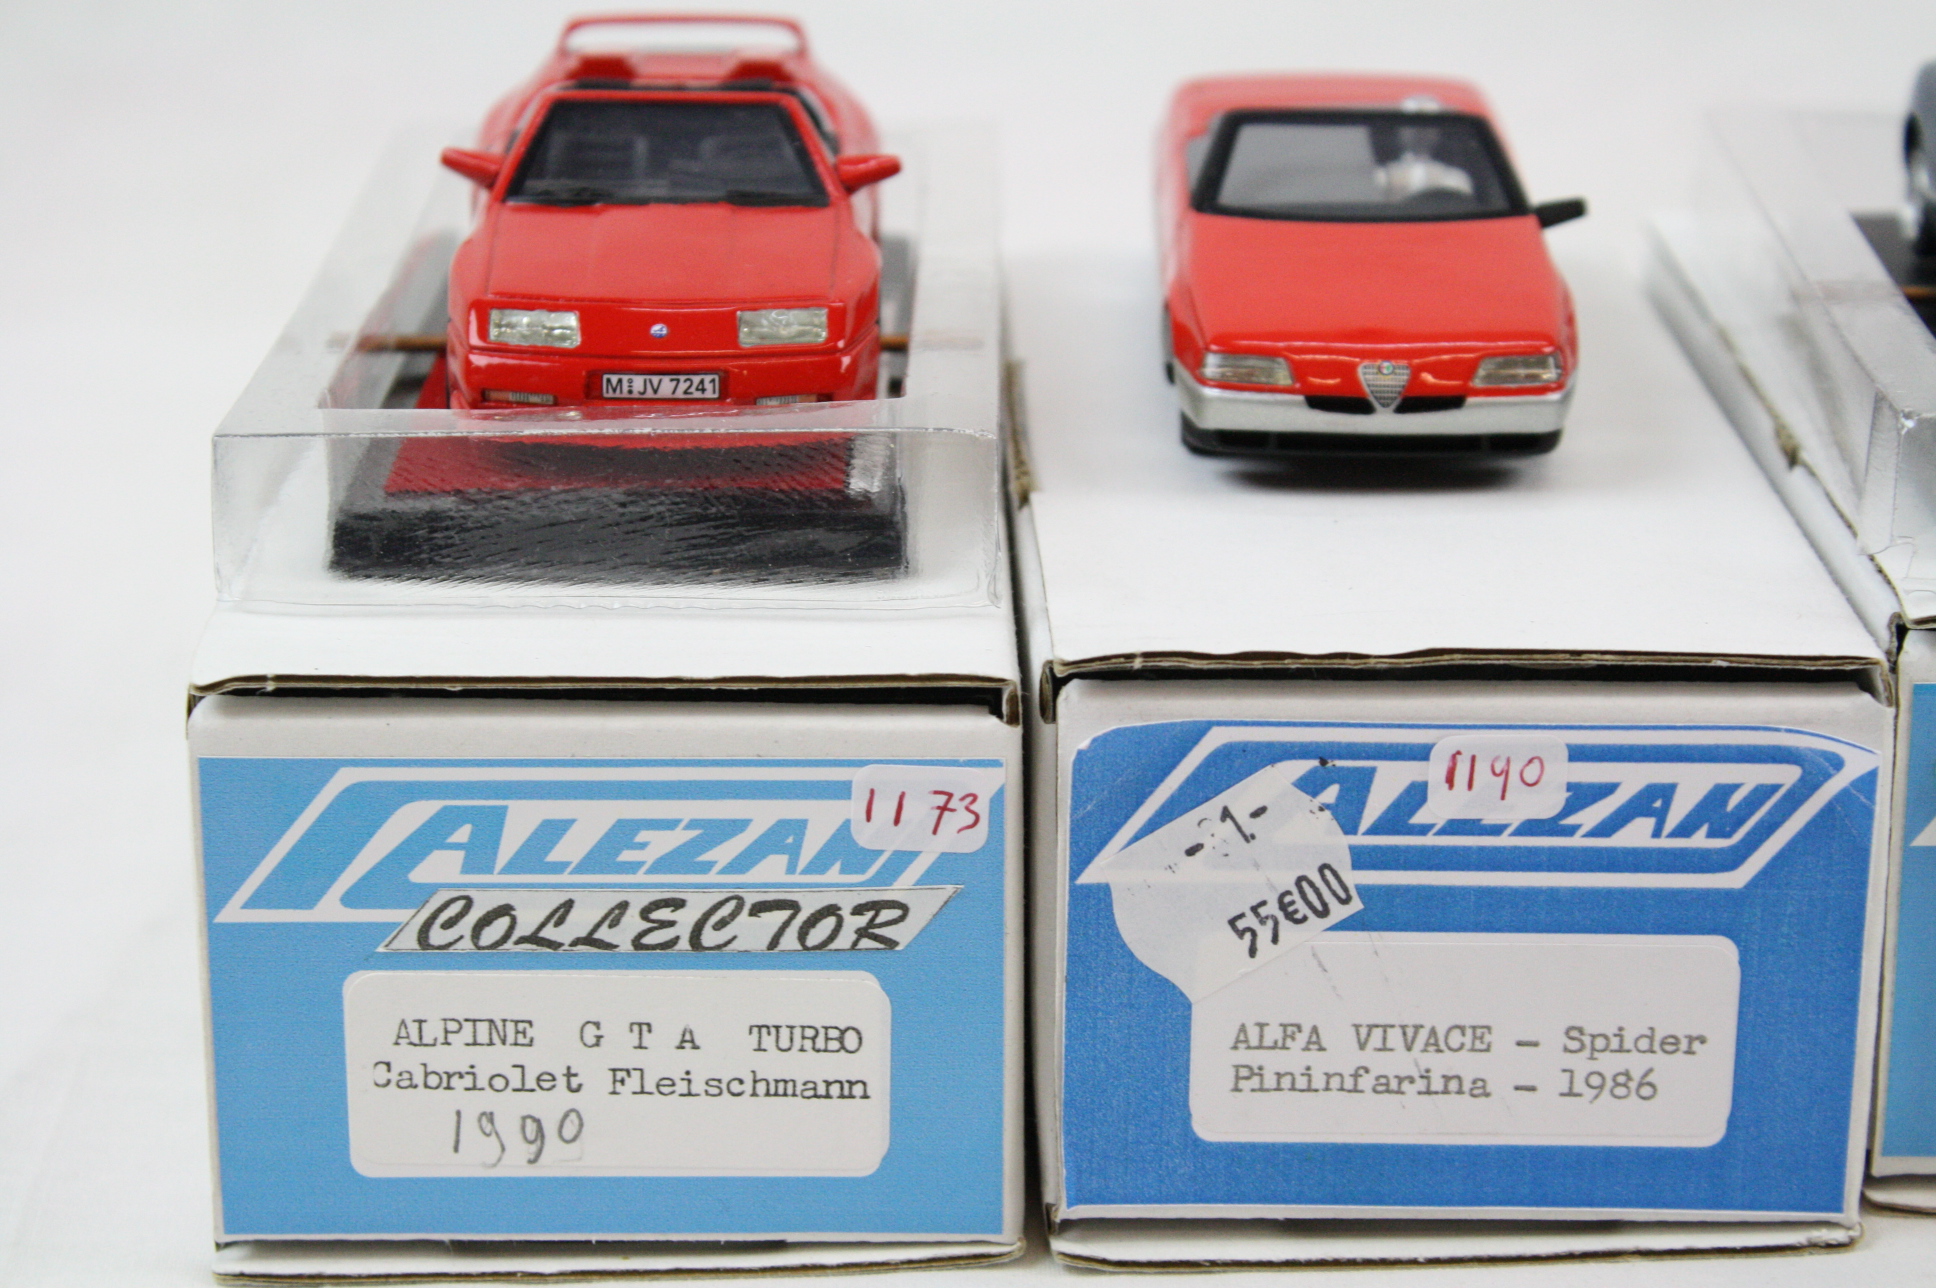 Four boxed 1:43 Alezan plastic models to include 1986 Alfa Vivace Spider Pininfarina in red (wing - Image 2 of 5